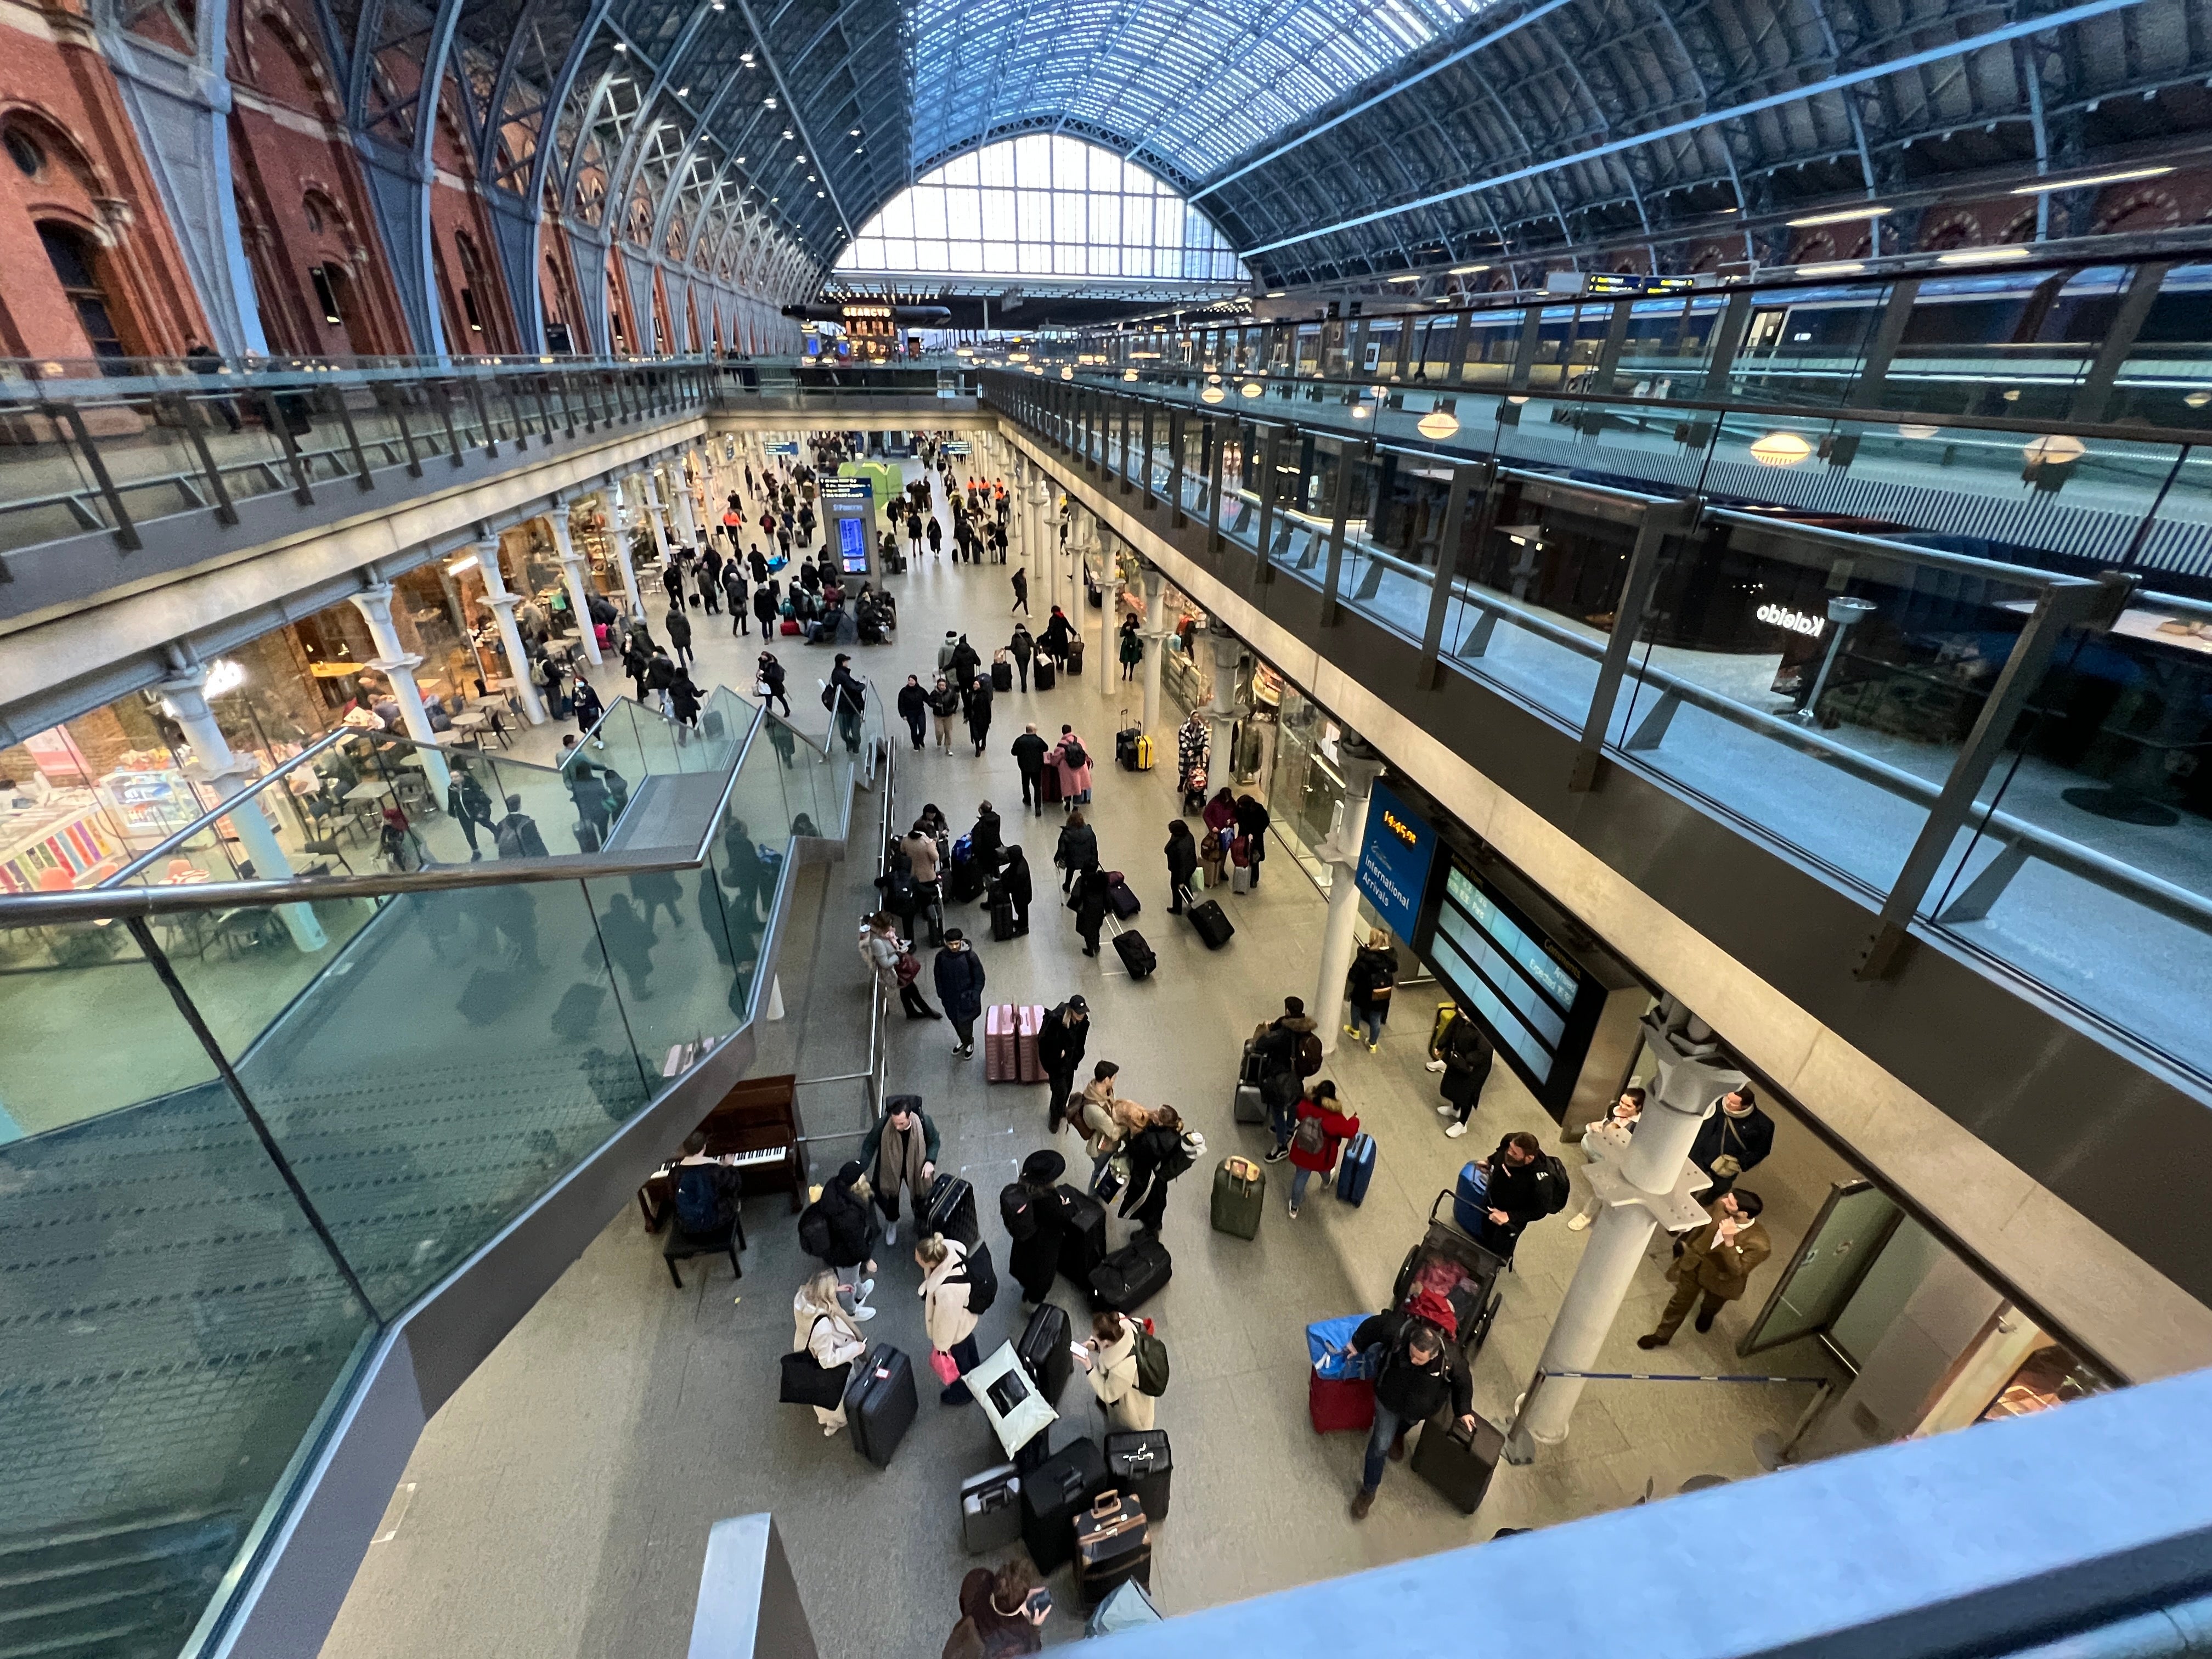 Action station: London St Pancras International, hub for HS1 to Kent and France